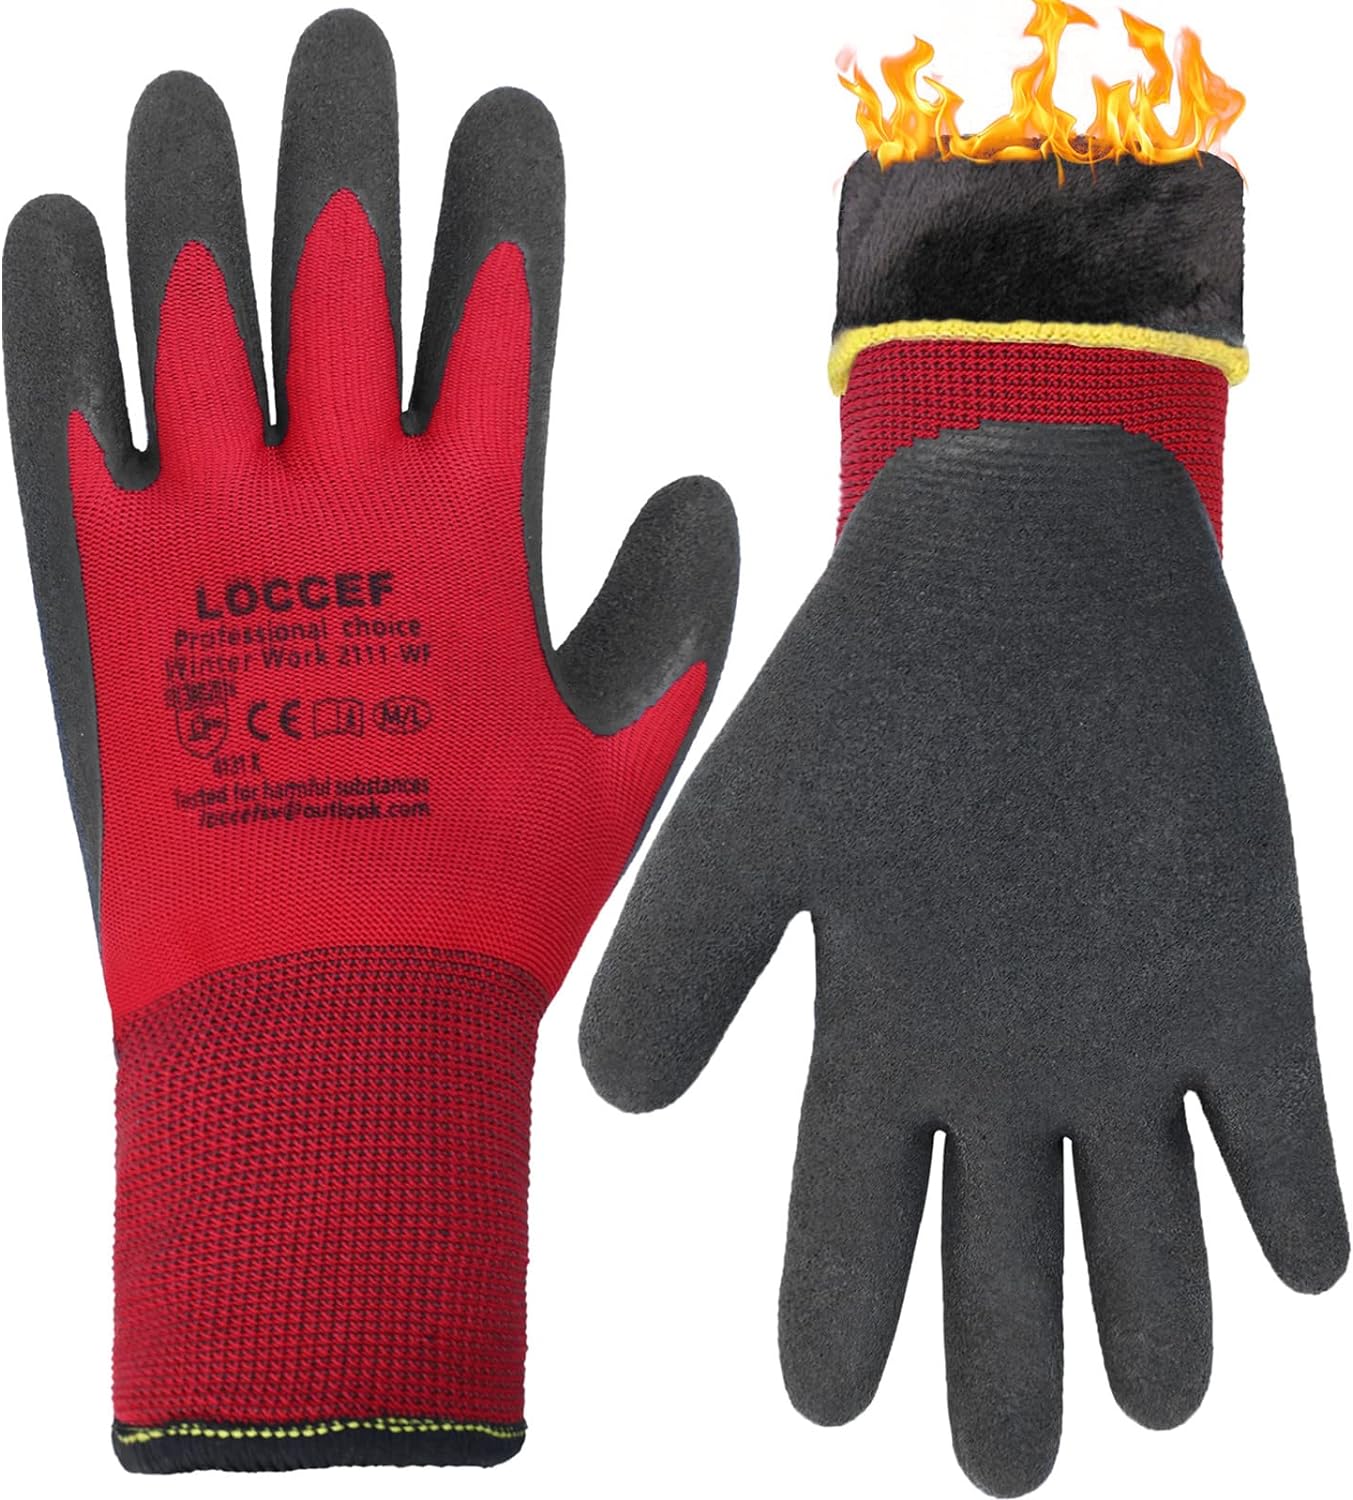 Generic Loccef 2 Pairs Winter Work Gloves for Men and Women